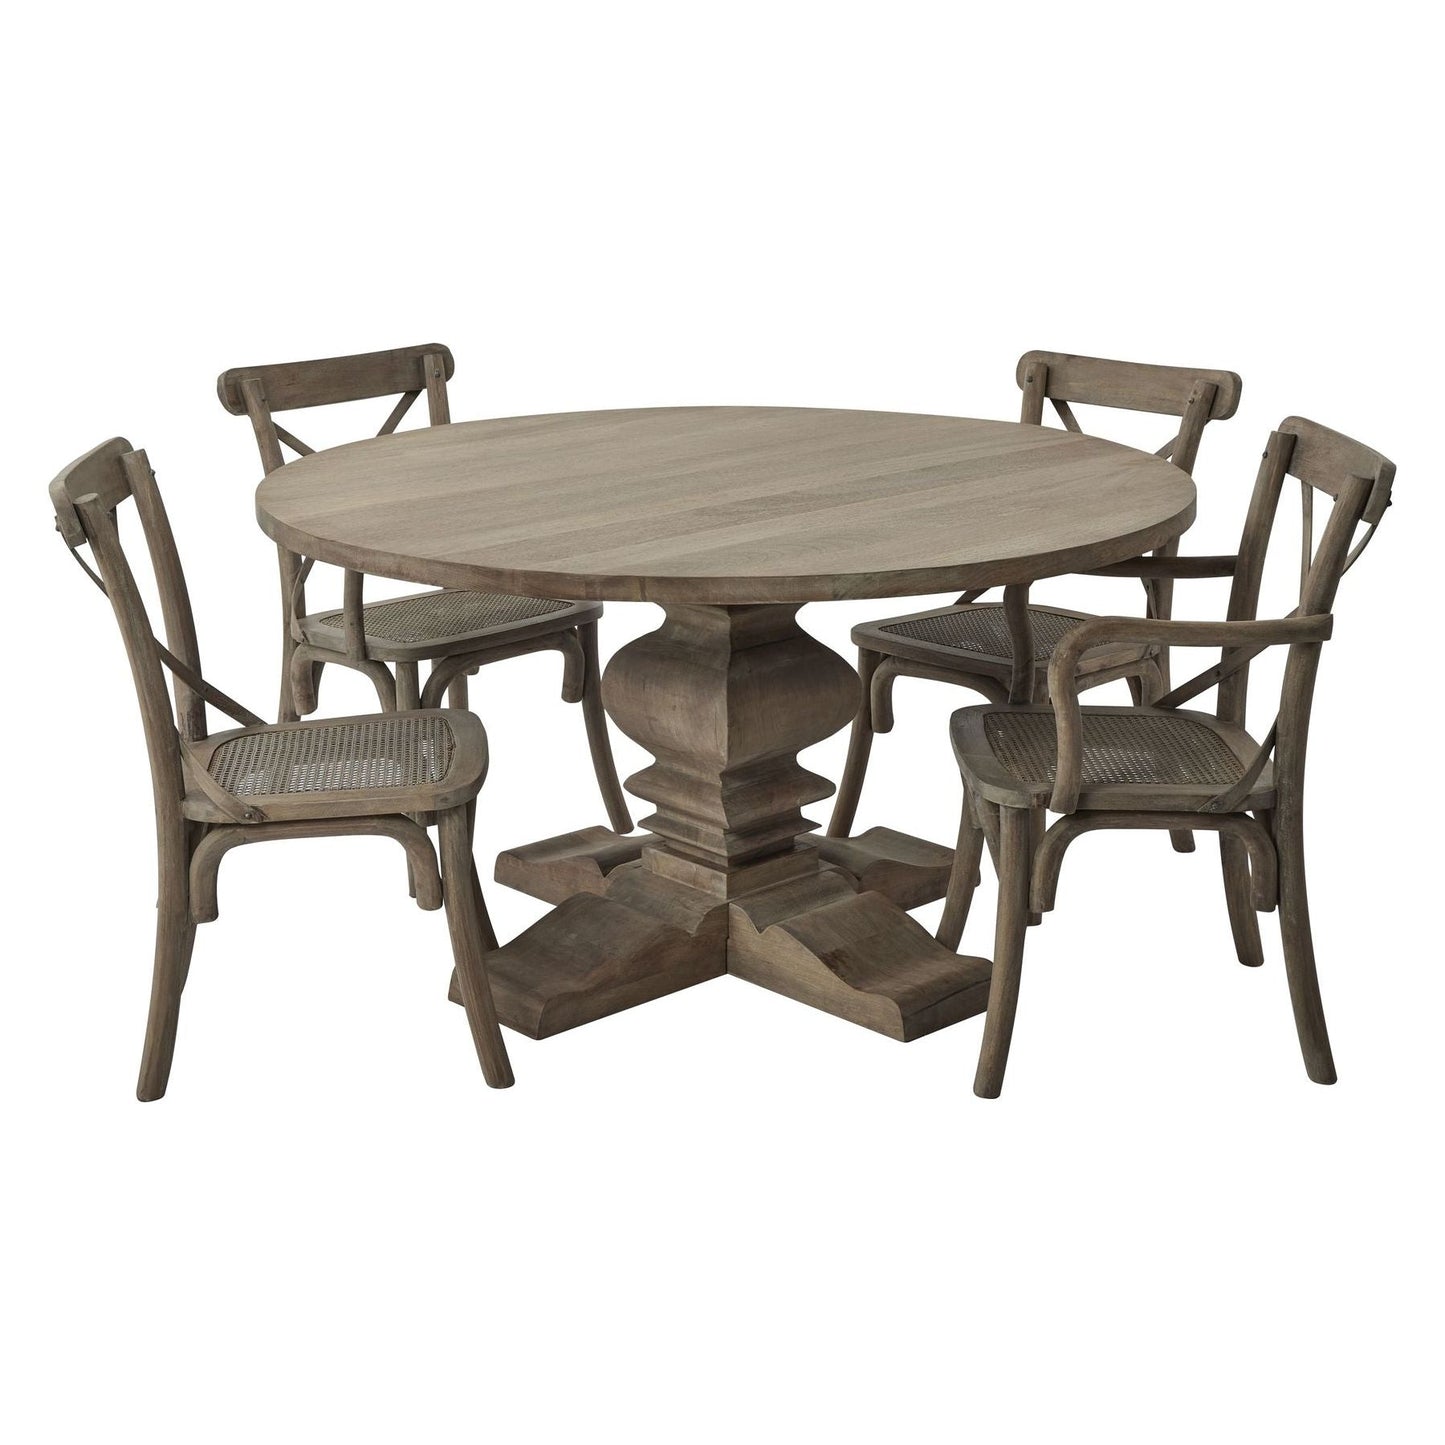 Copgrove Collection Round Pedestal Dining Table - Ashton and Finch